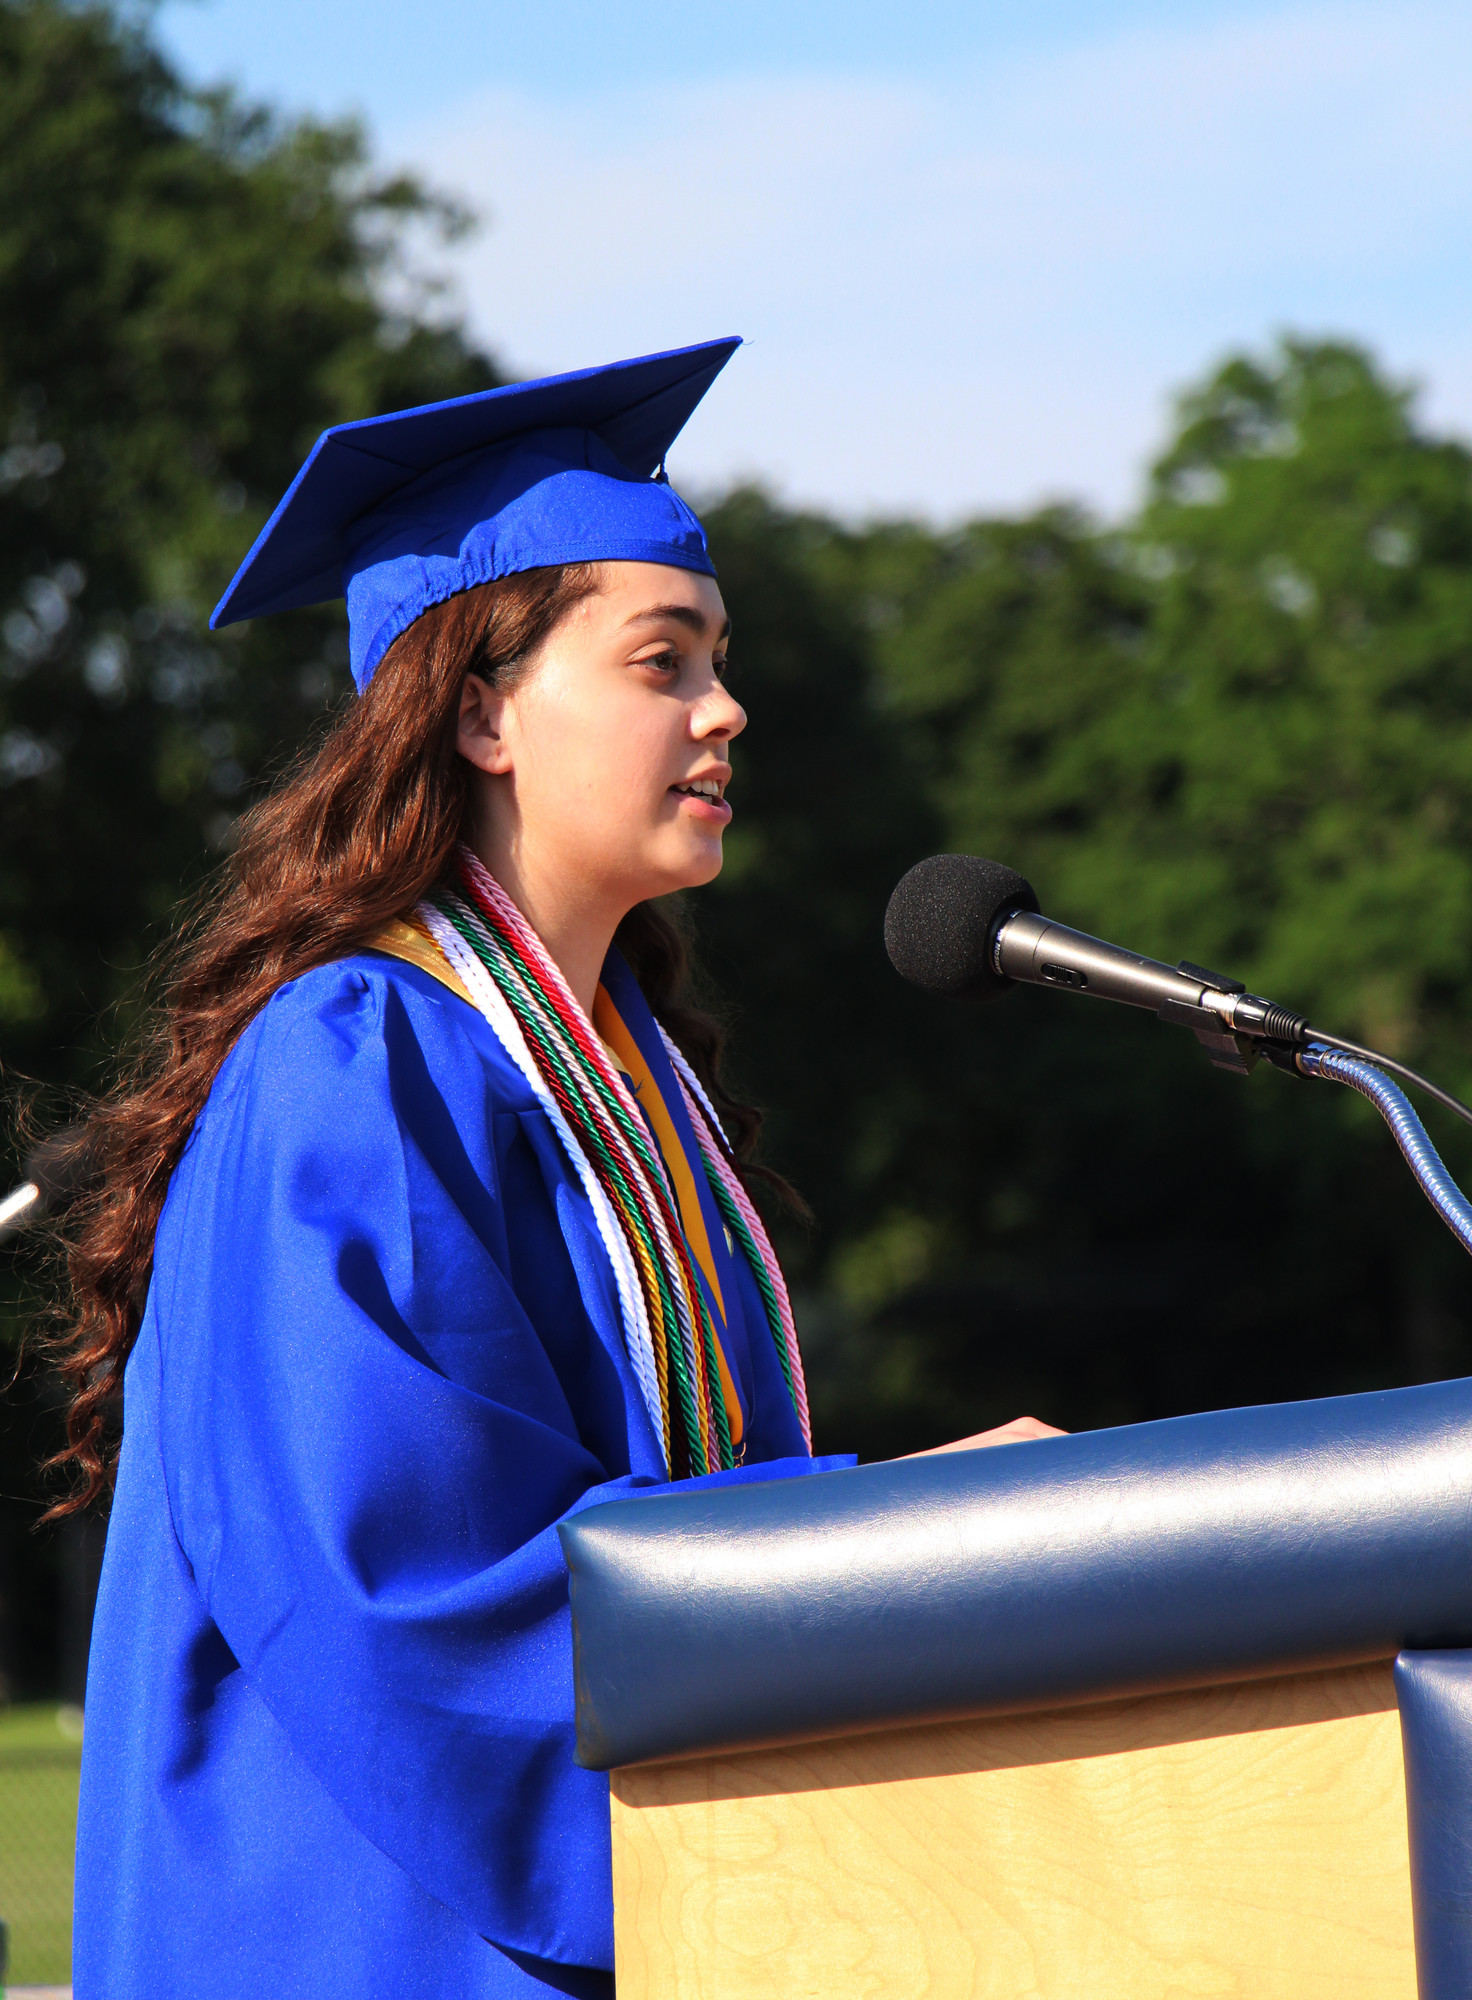 Chelsea McGowen, the salutatorian, urged her classmates to “remember the way you feel in this moment” for the rest of their lives.